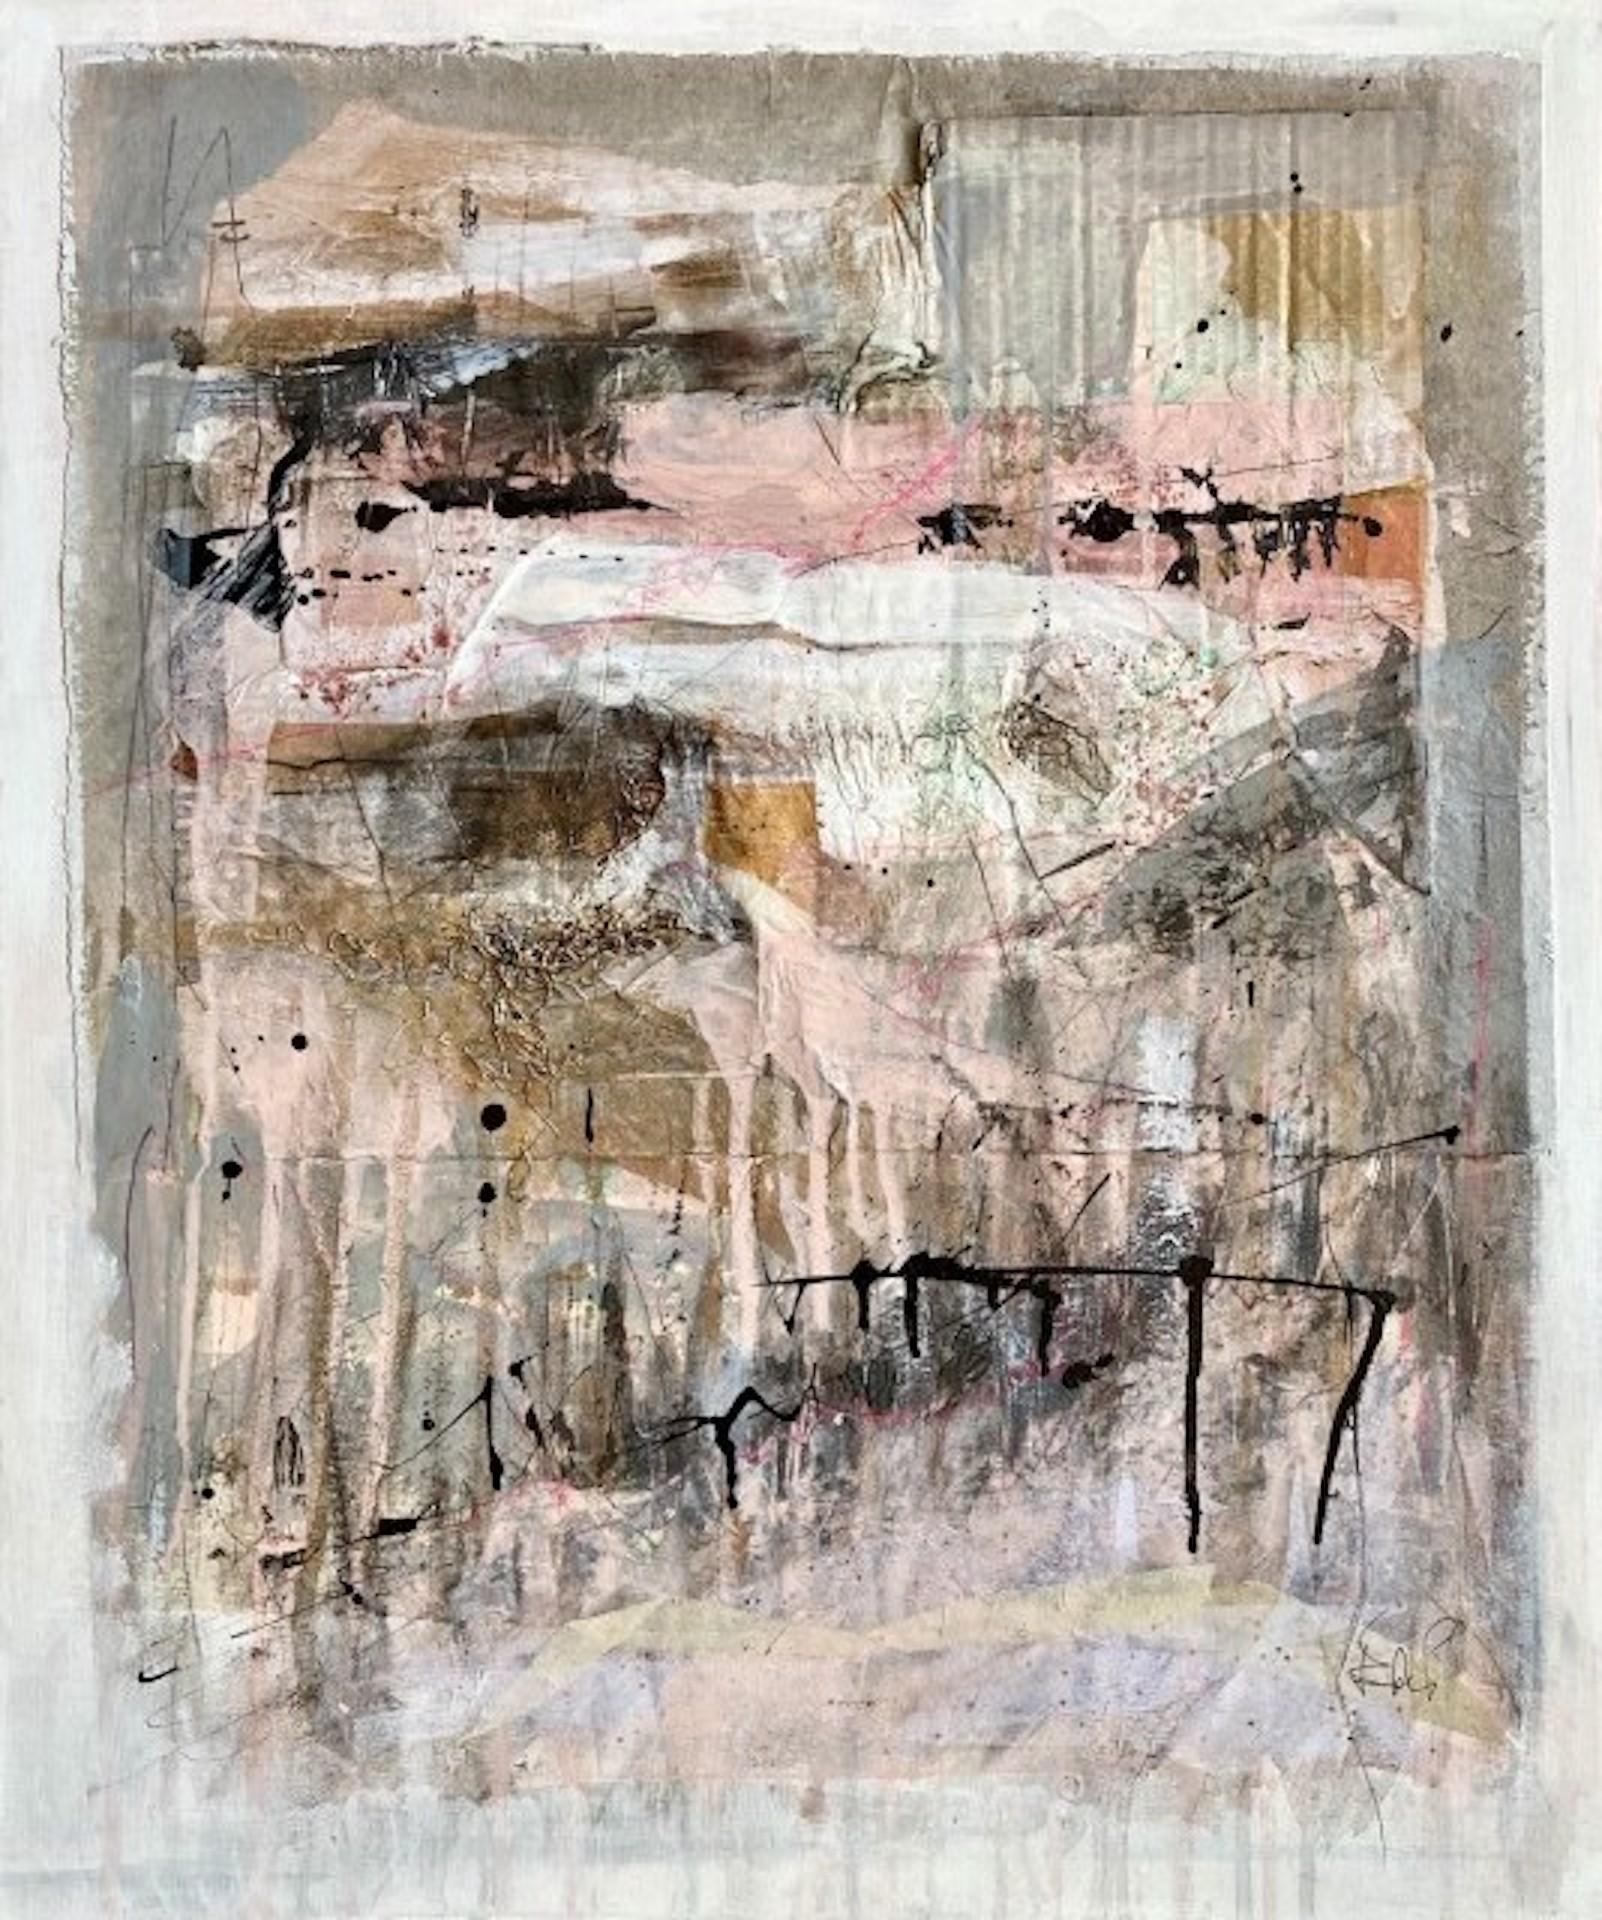 A Sense of Sea iii [2021]
Original
Abstract
Mixed media including collage, Chinese ink and gilding wax on artists board
Image size: H:61 cm x W:51 cm
Frame Size: H:64 cm x W:54 cm x D:3.5cm
Sold Framed
Please note that insitu images are purely an